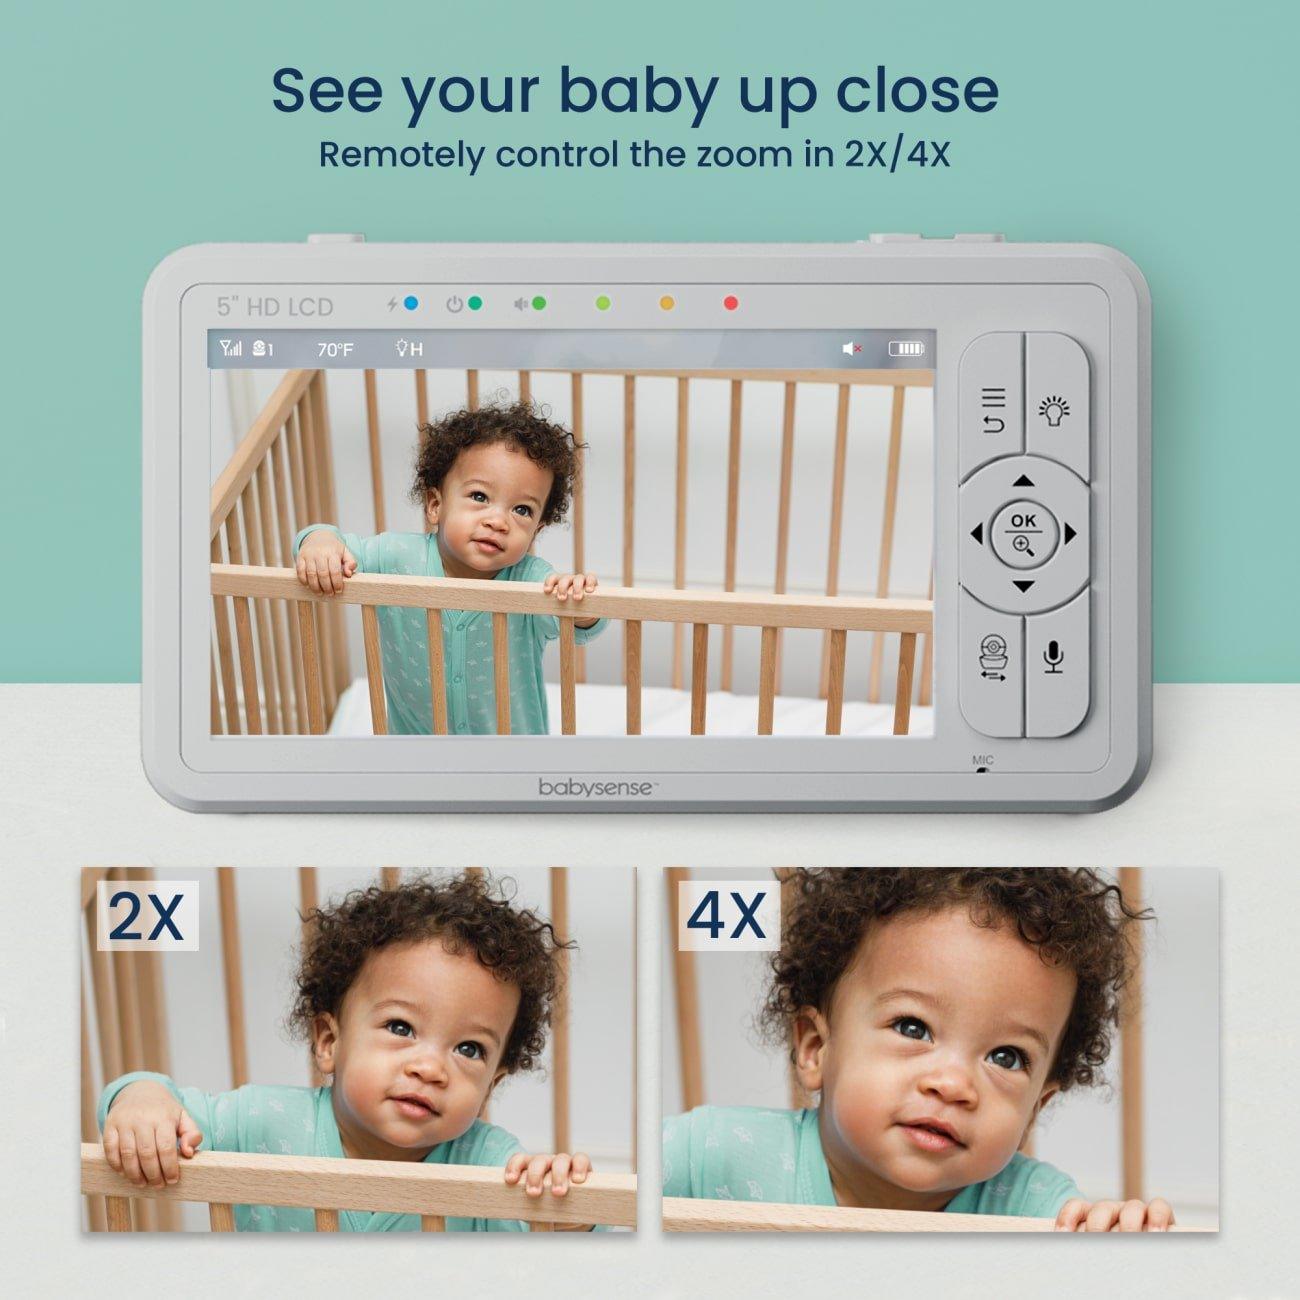 Blemil Baby Monitor, 5 Large Split-Screen Video Baby Monitor with 2  Cameras